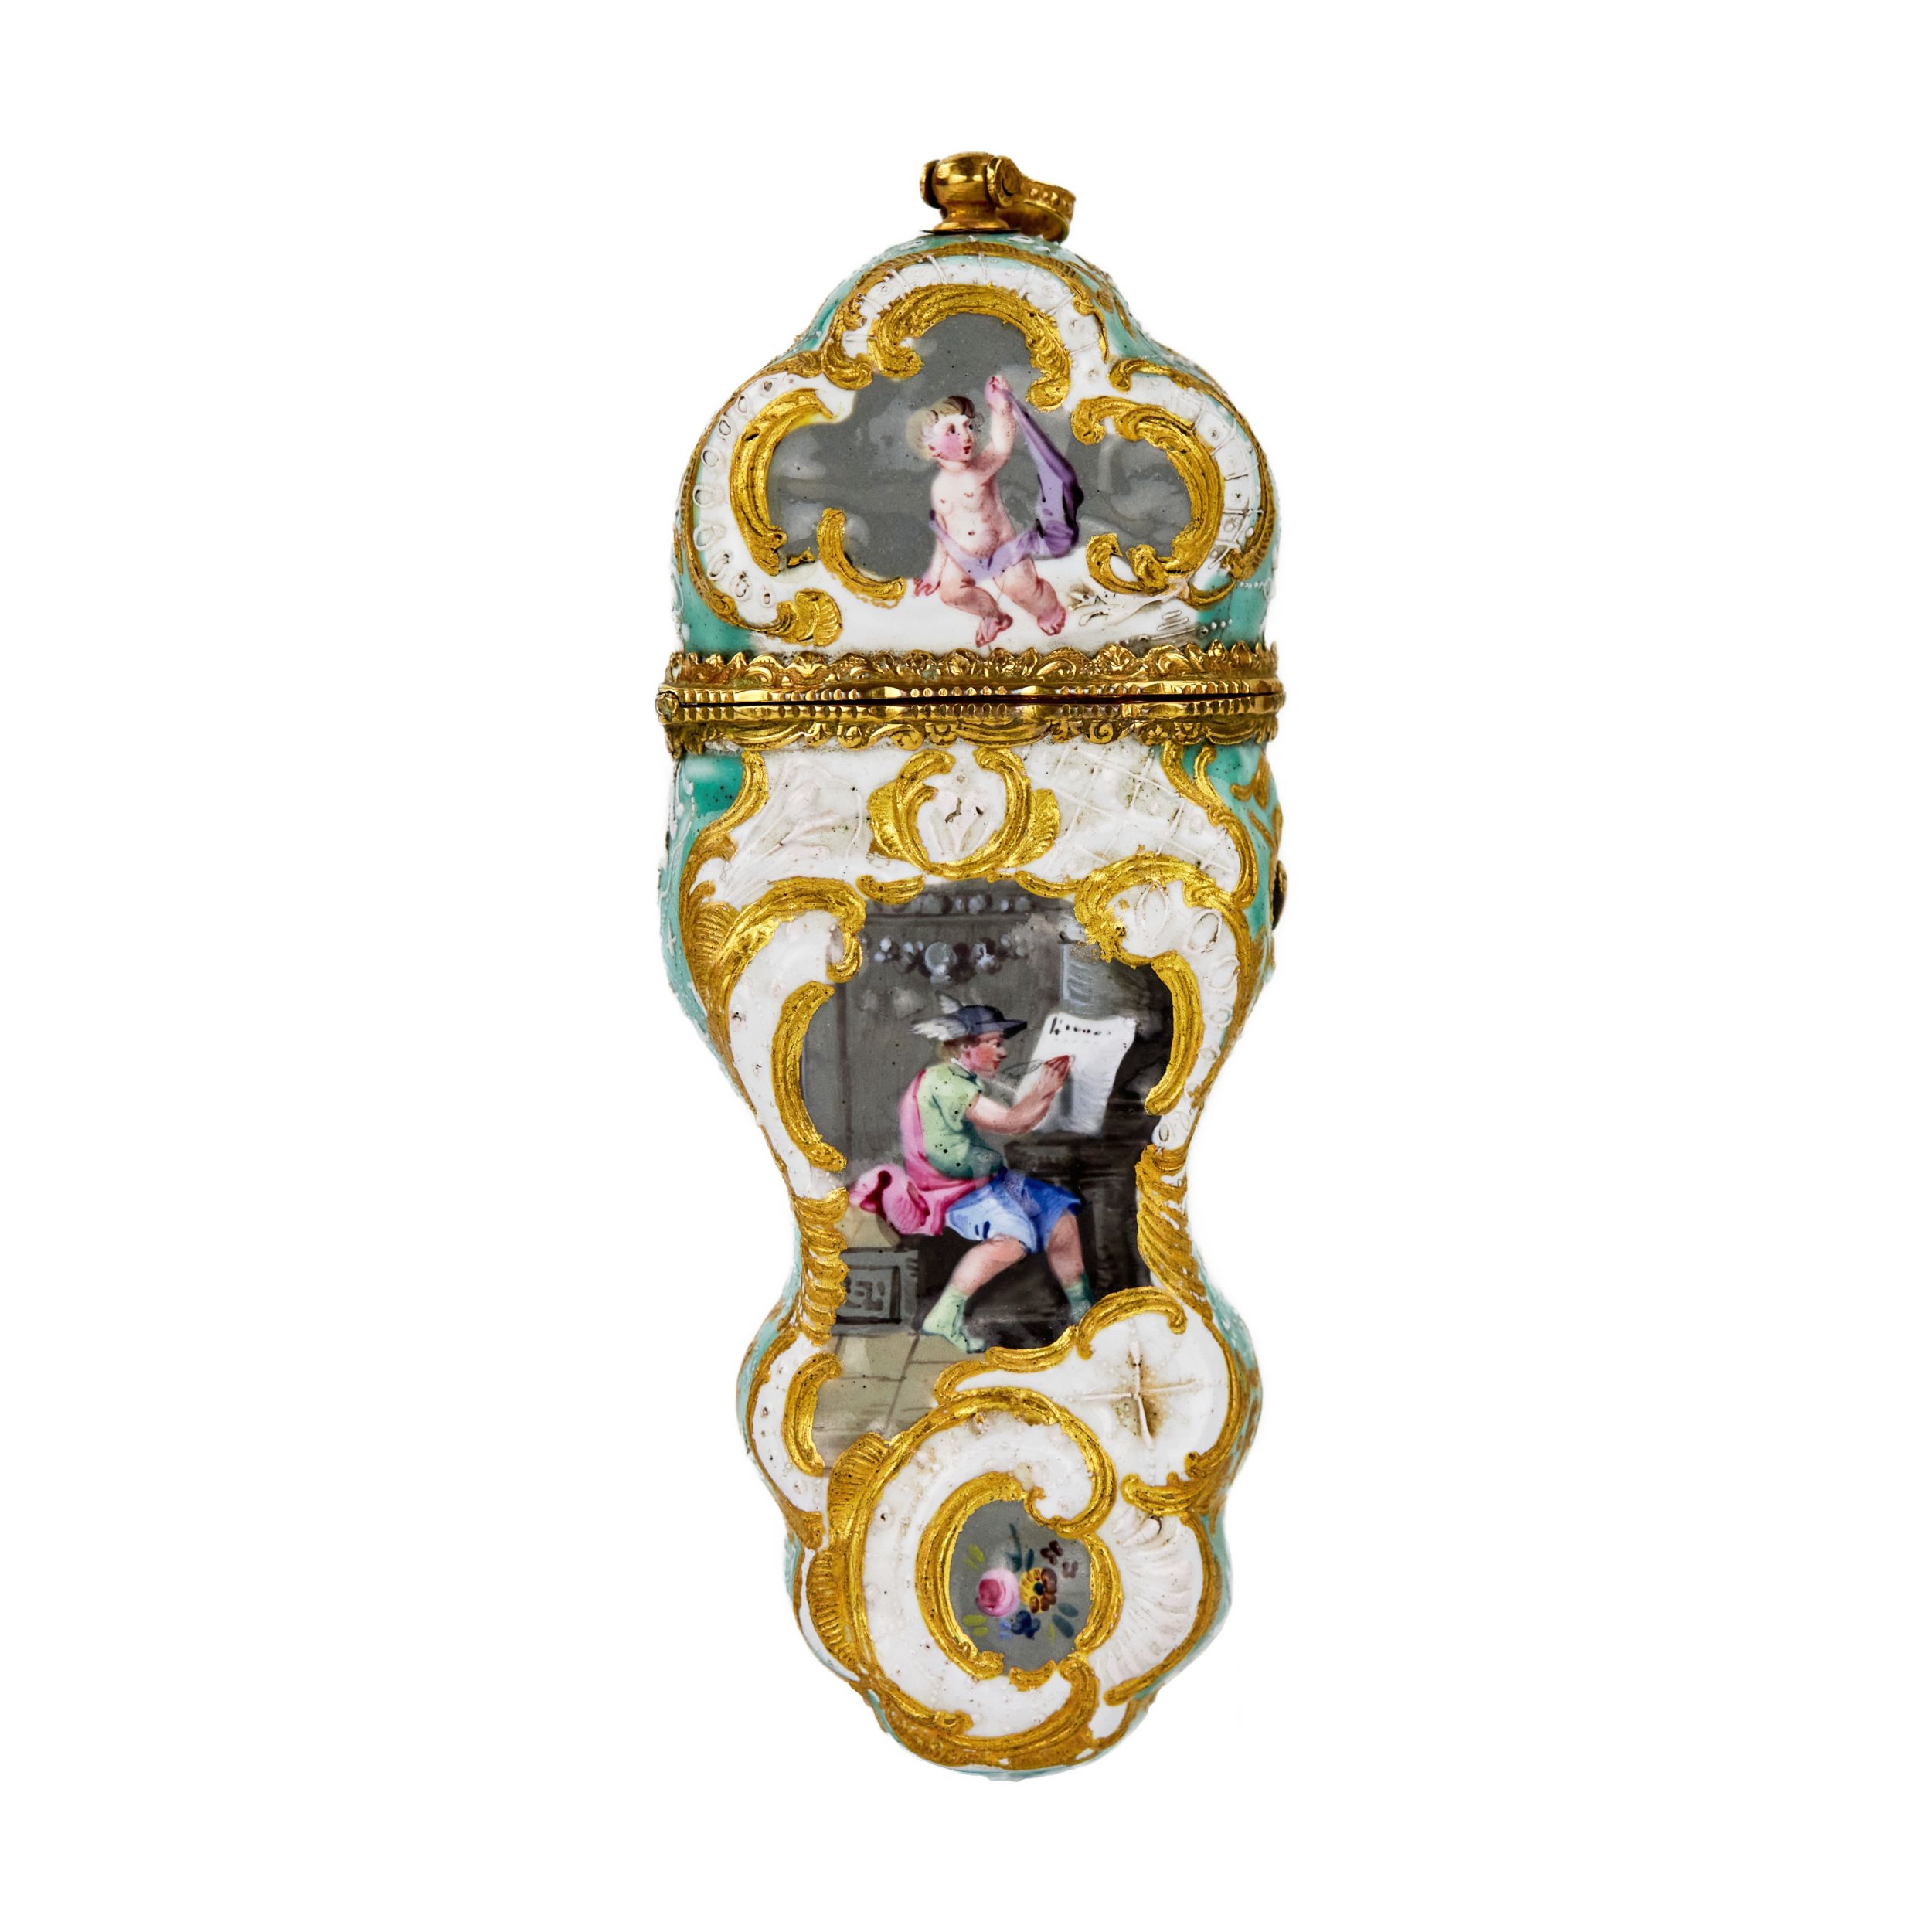 English painted porcelain necessaire with gold. 18 century. - Image 3 of 10